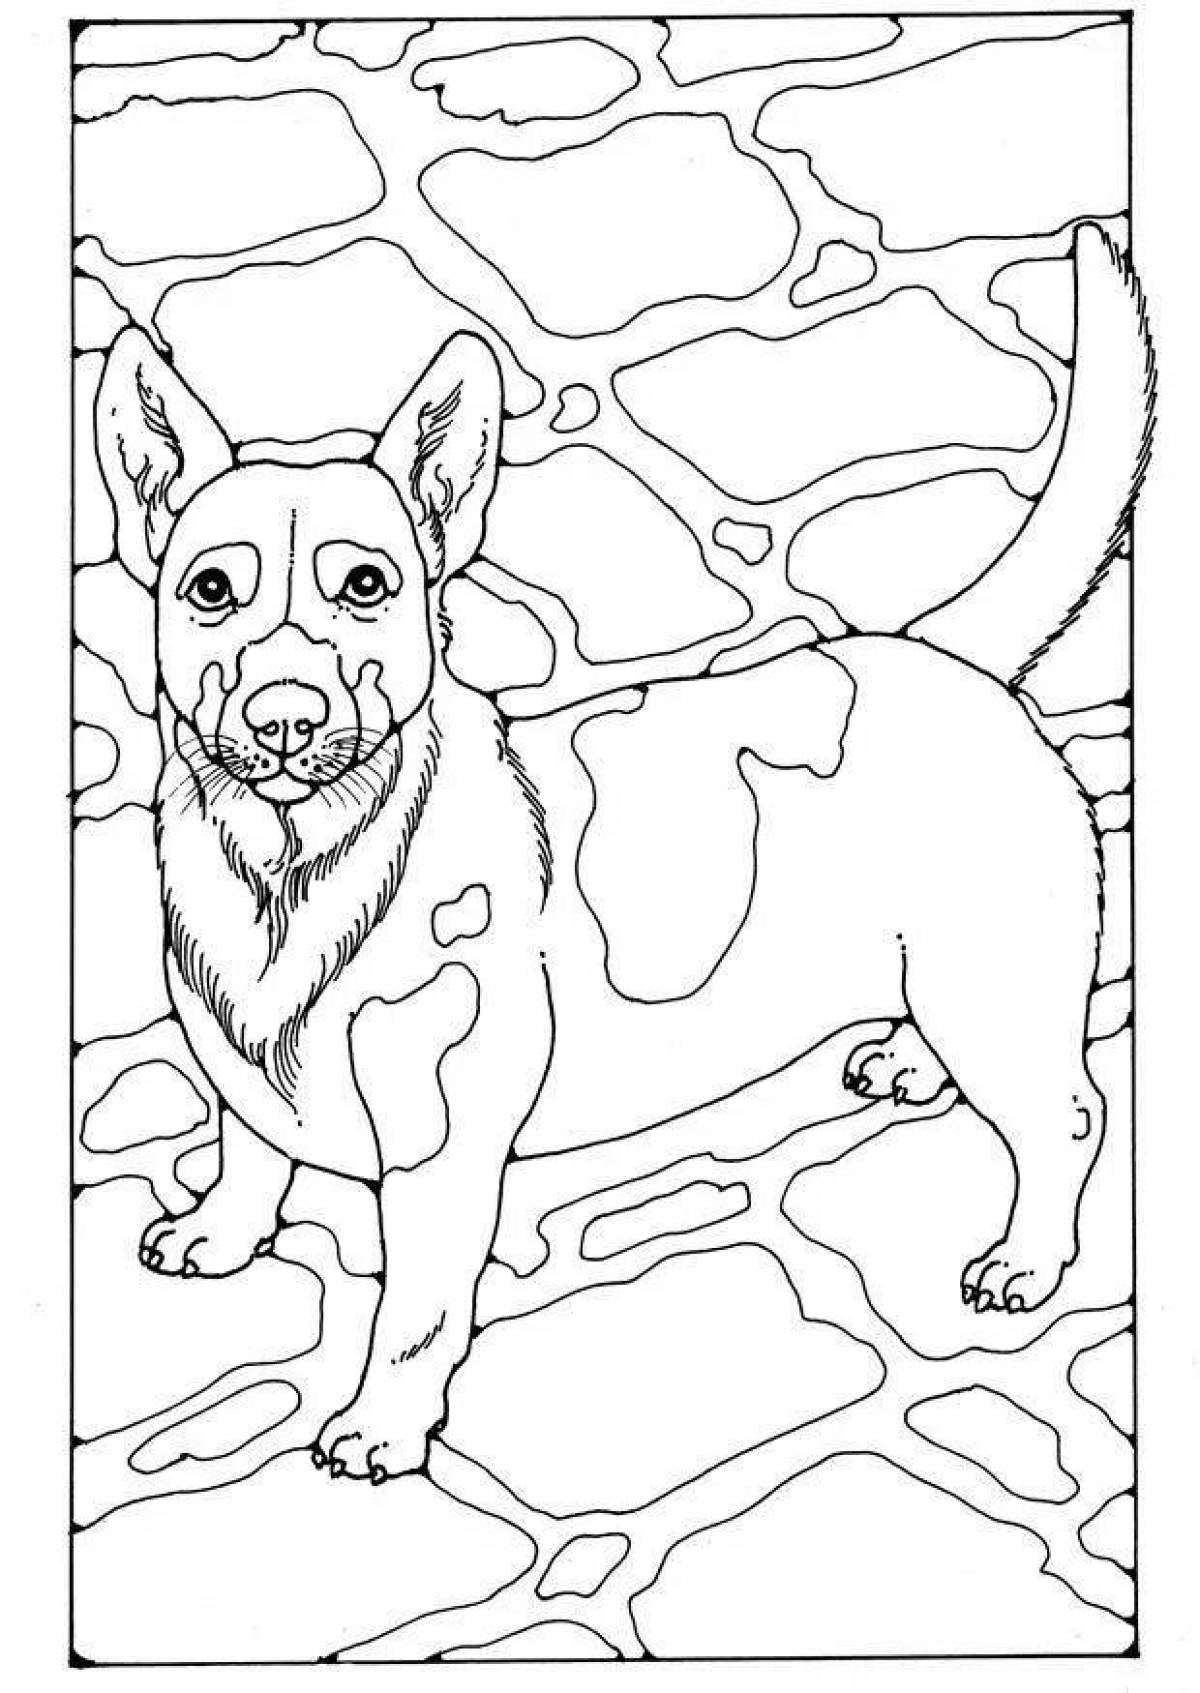 Coloring book brave jack russell